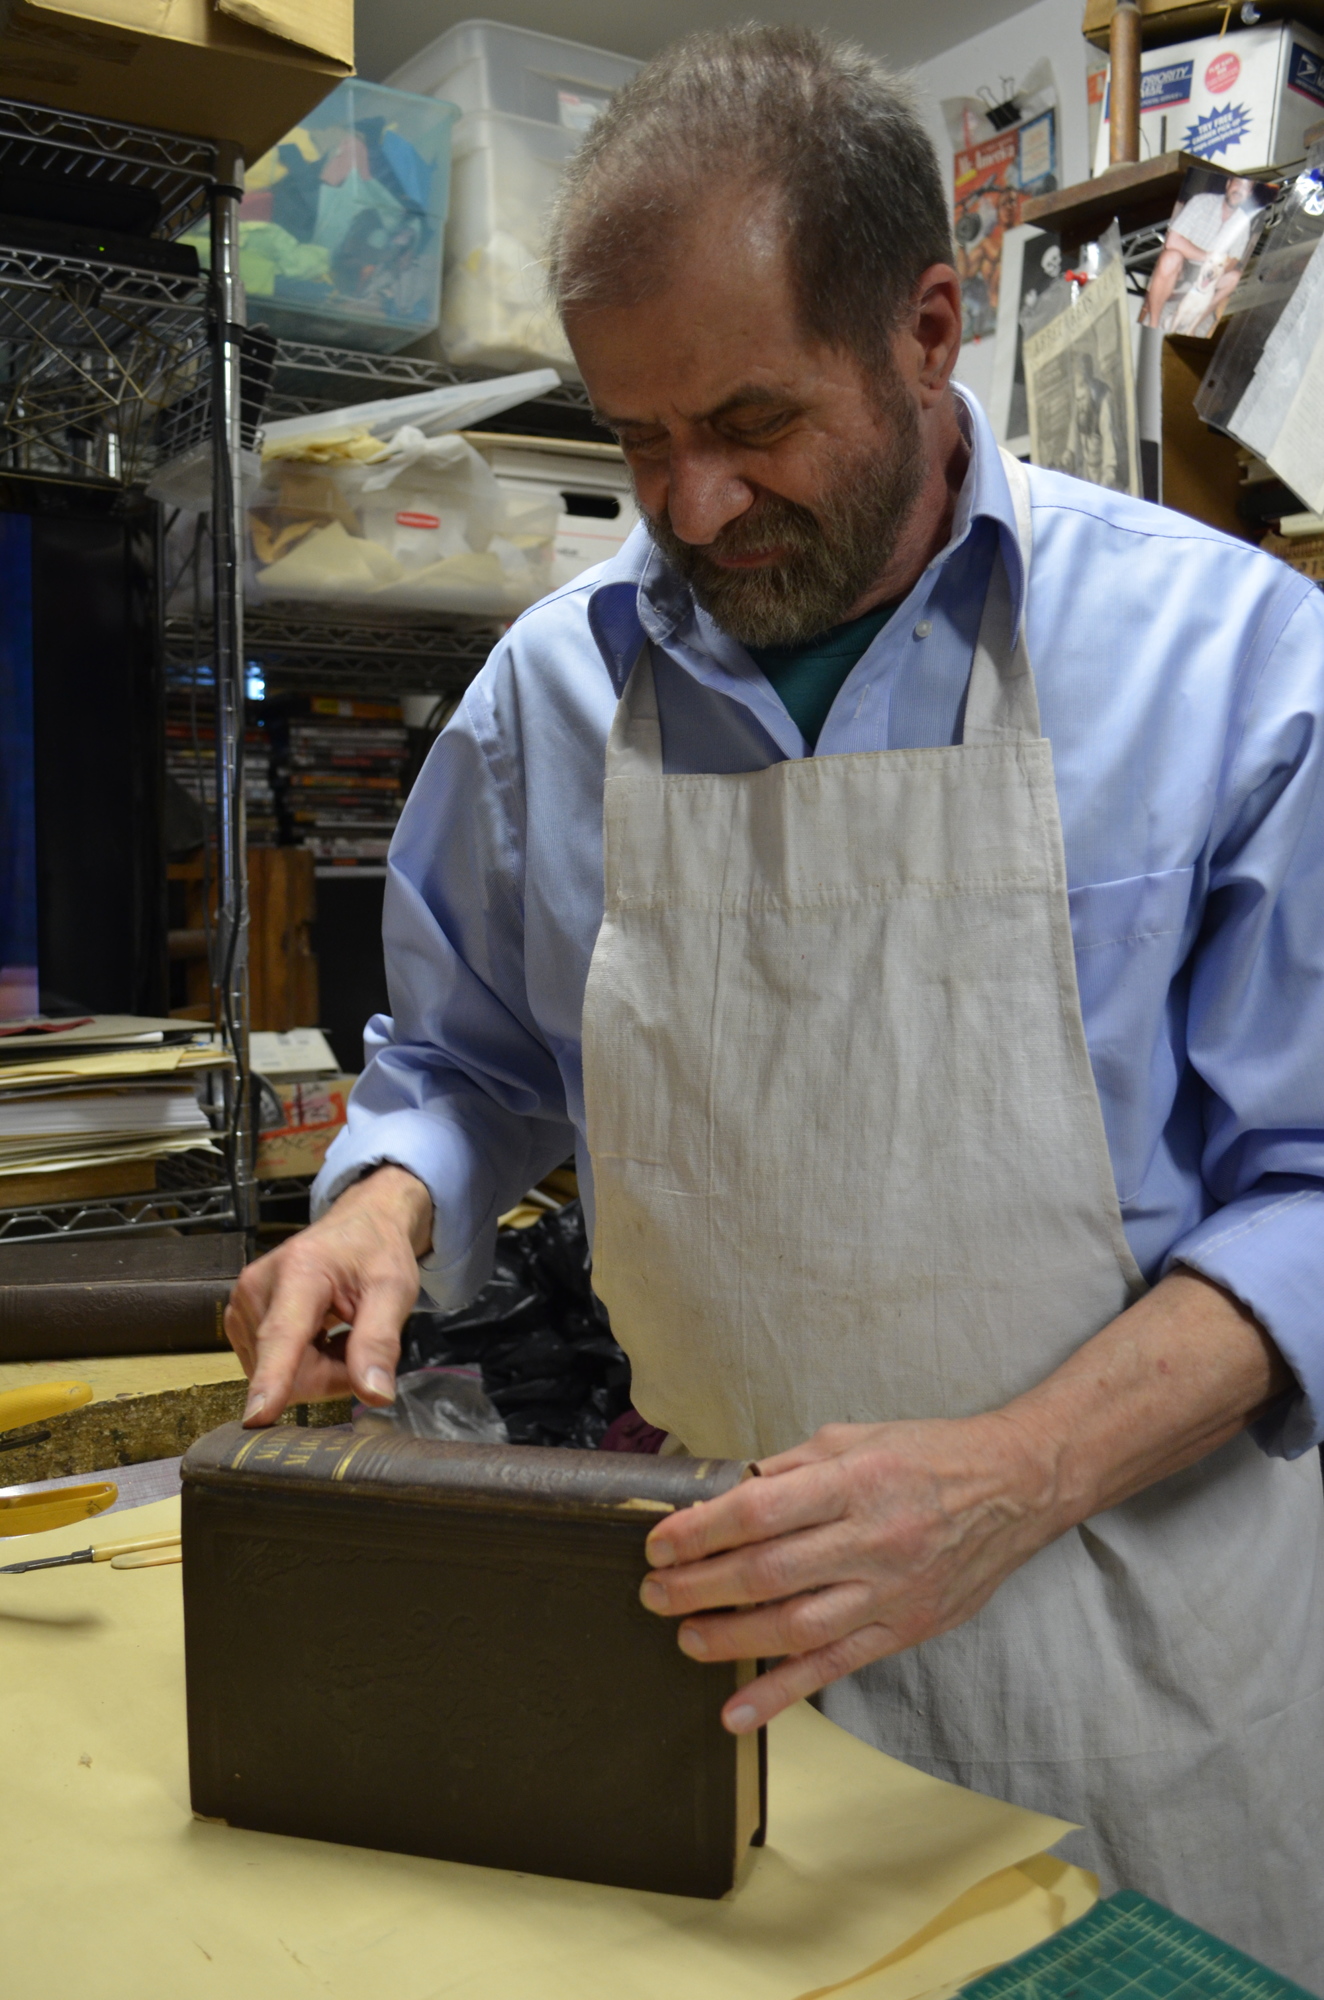 Tapley examines a title he's working to restore that was previously fixed by using tape.